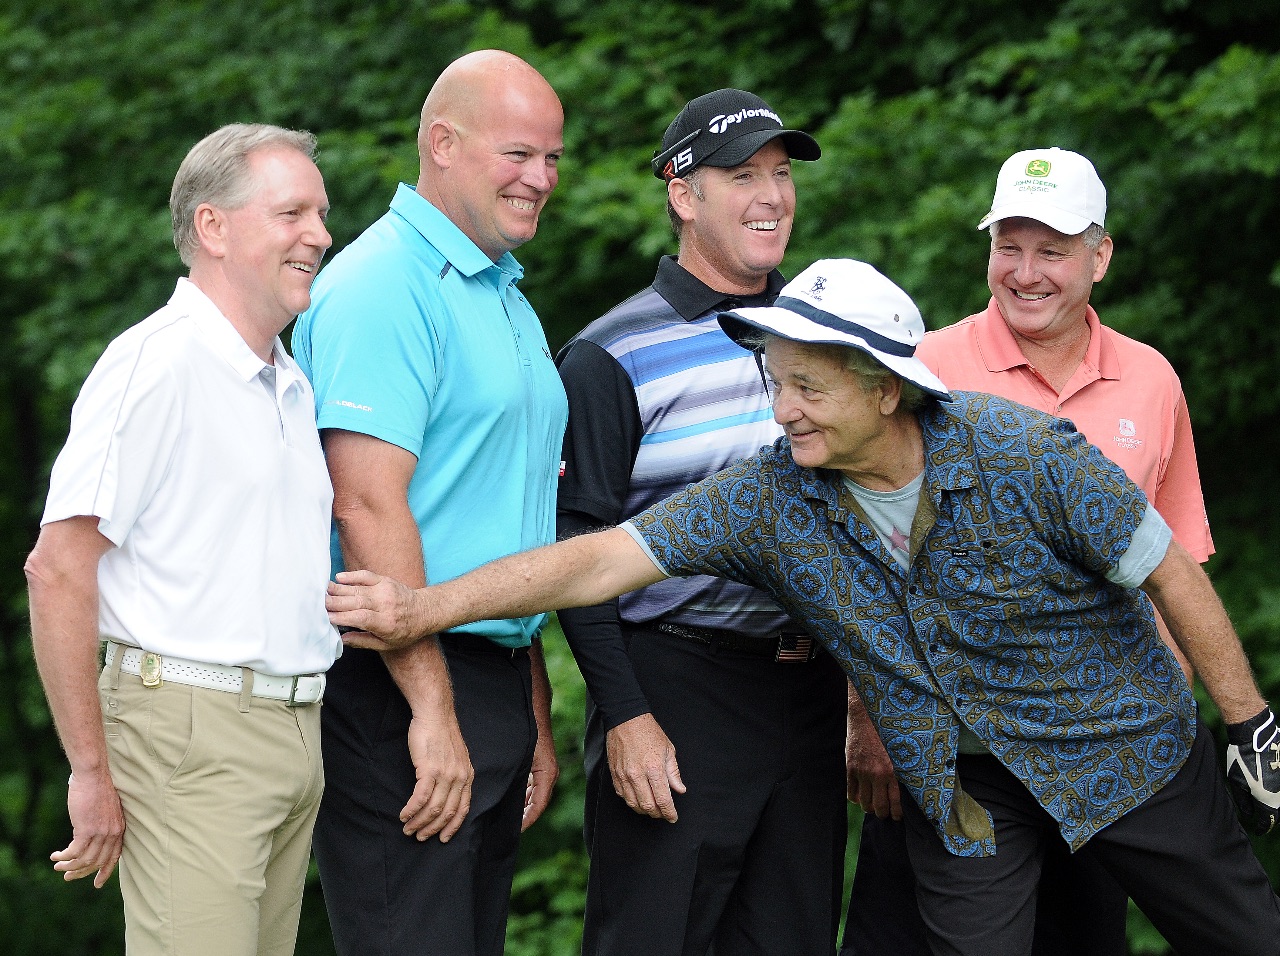 Actor Bill Murray tells his playing partners to suck in their guts for the official photo before teeing off on the first hole of the John Deere Classic Pro-Am, Wednesday July 8, 2015. Pictured with Mr. Murray are, left to right, John Lagemann, Jason Luebbe, PGA Pro D.A. Points and Russ Rerucha. (Photo by Todd Mizener - Dispatch/Argus)